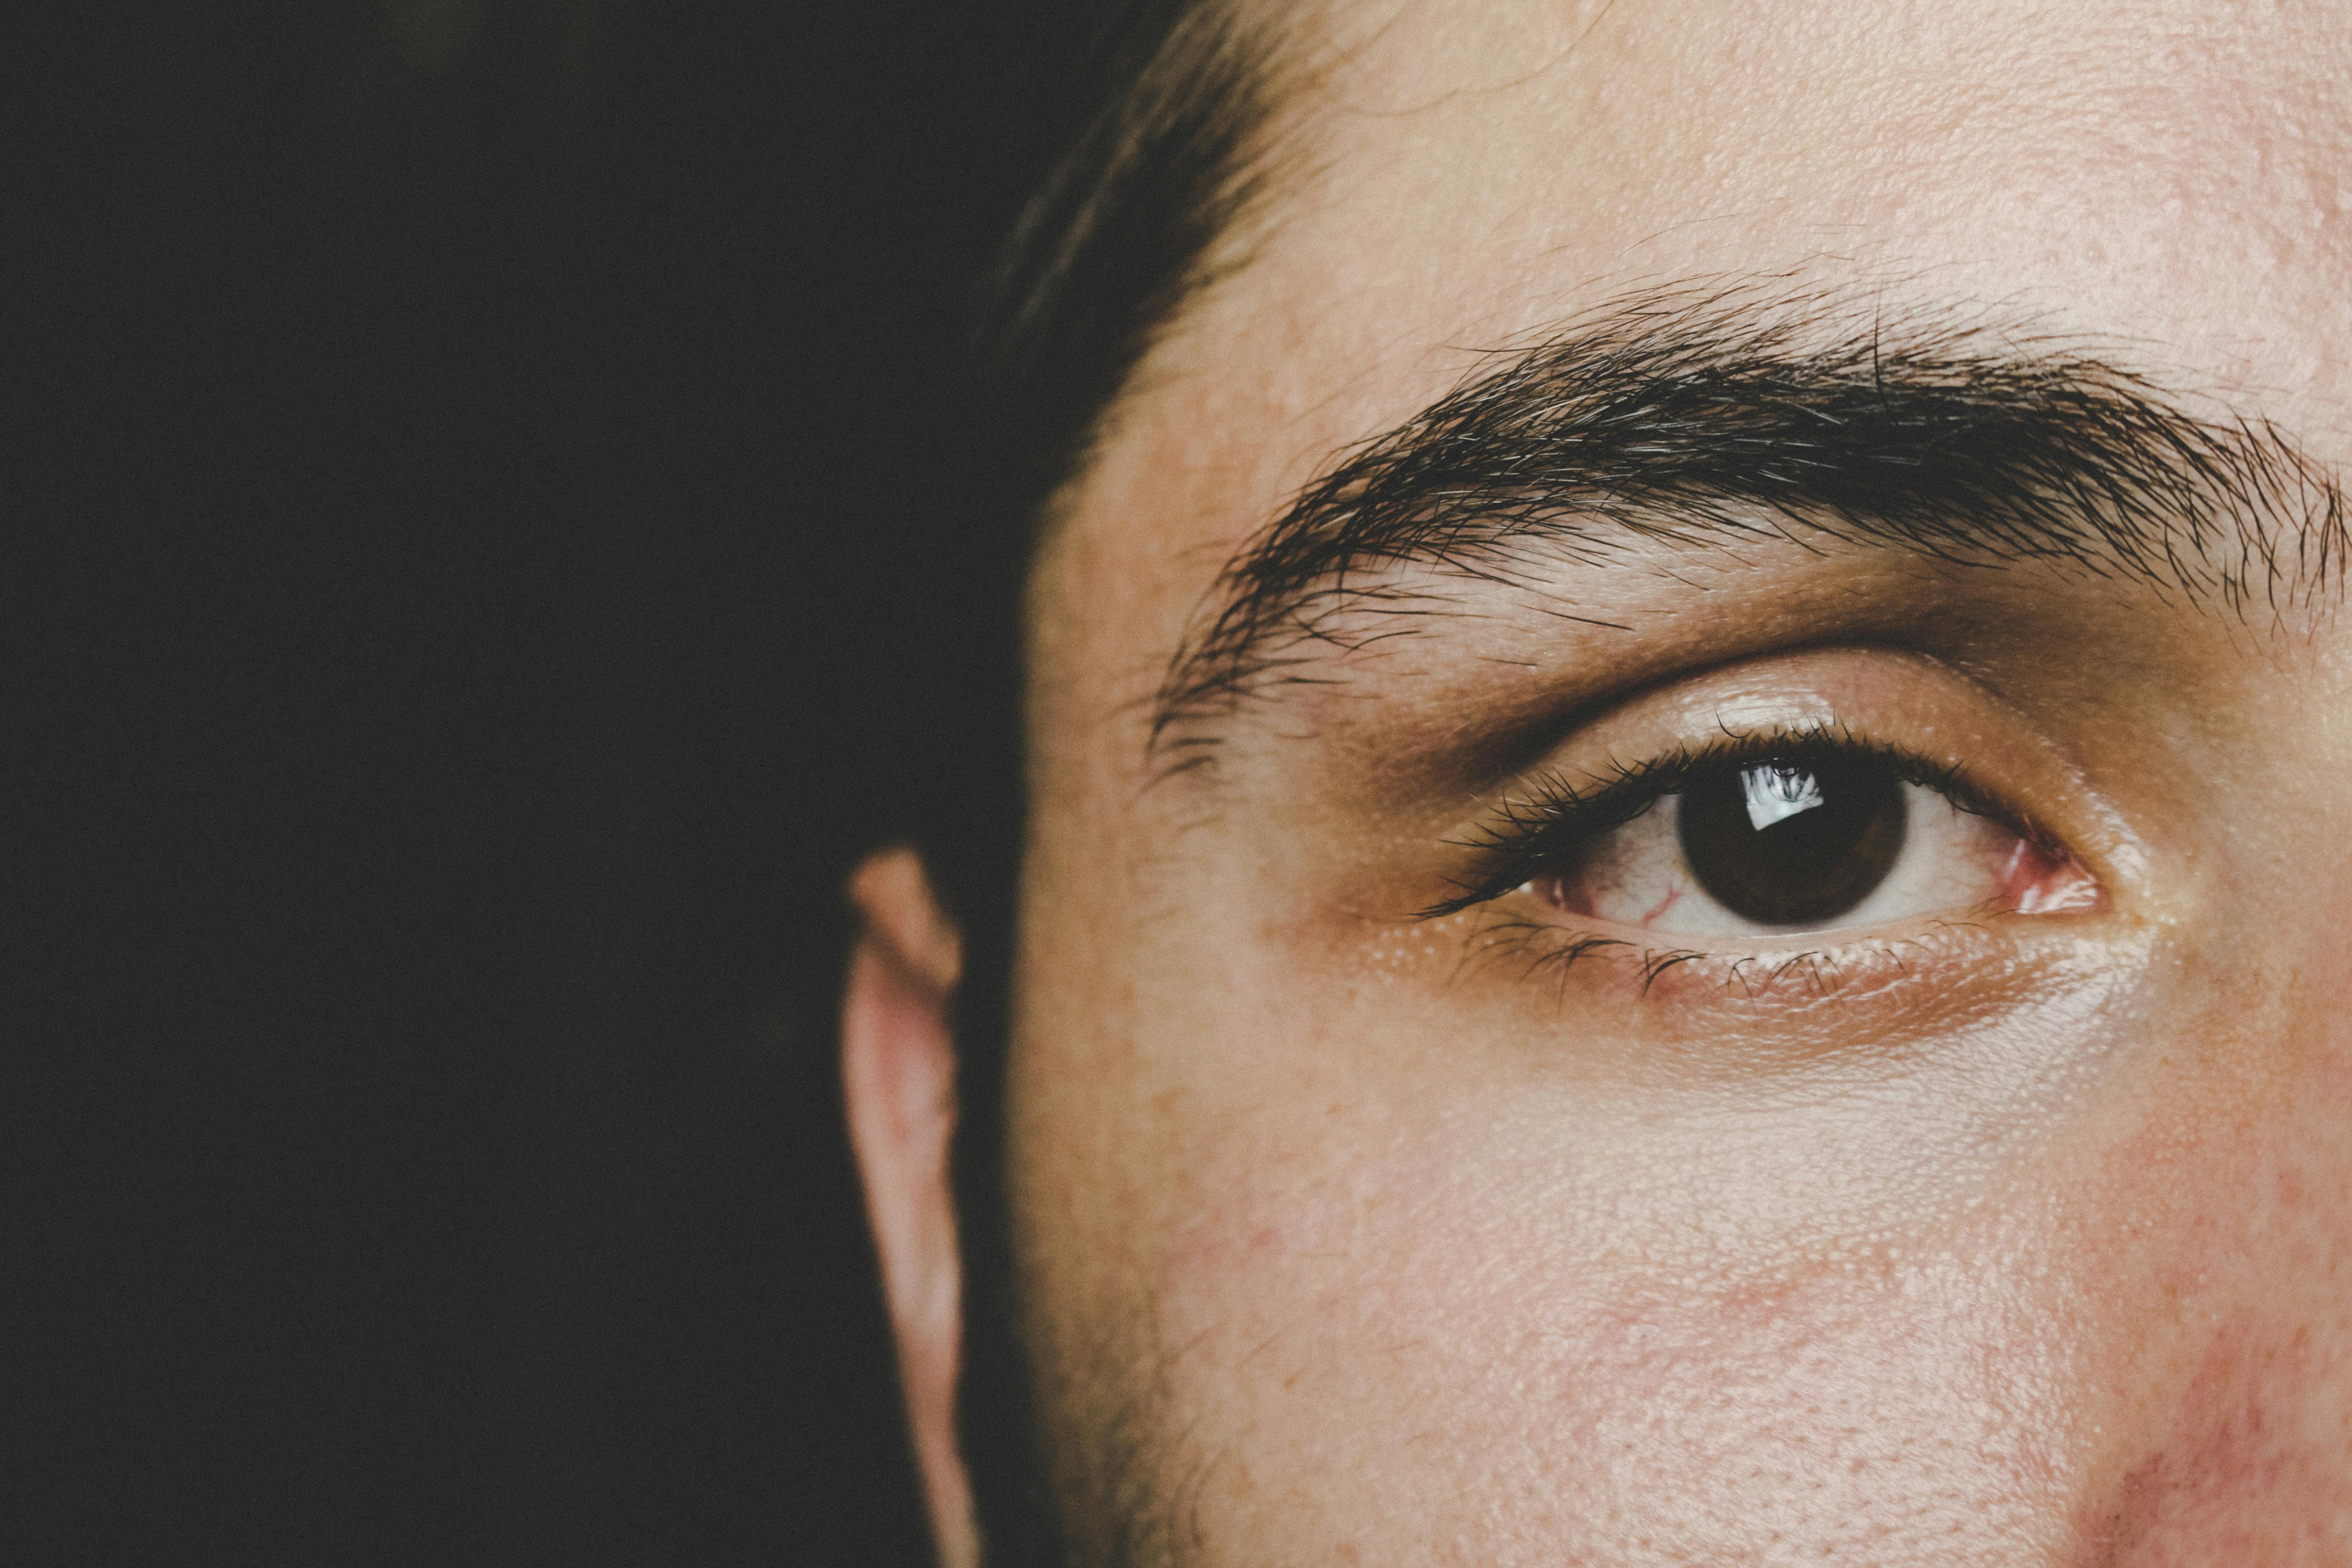 Close-up photo of a man's right eye | Source: Pexels